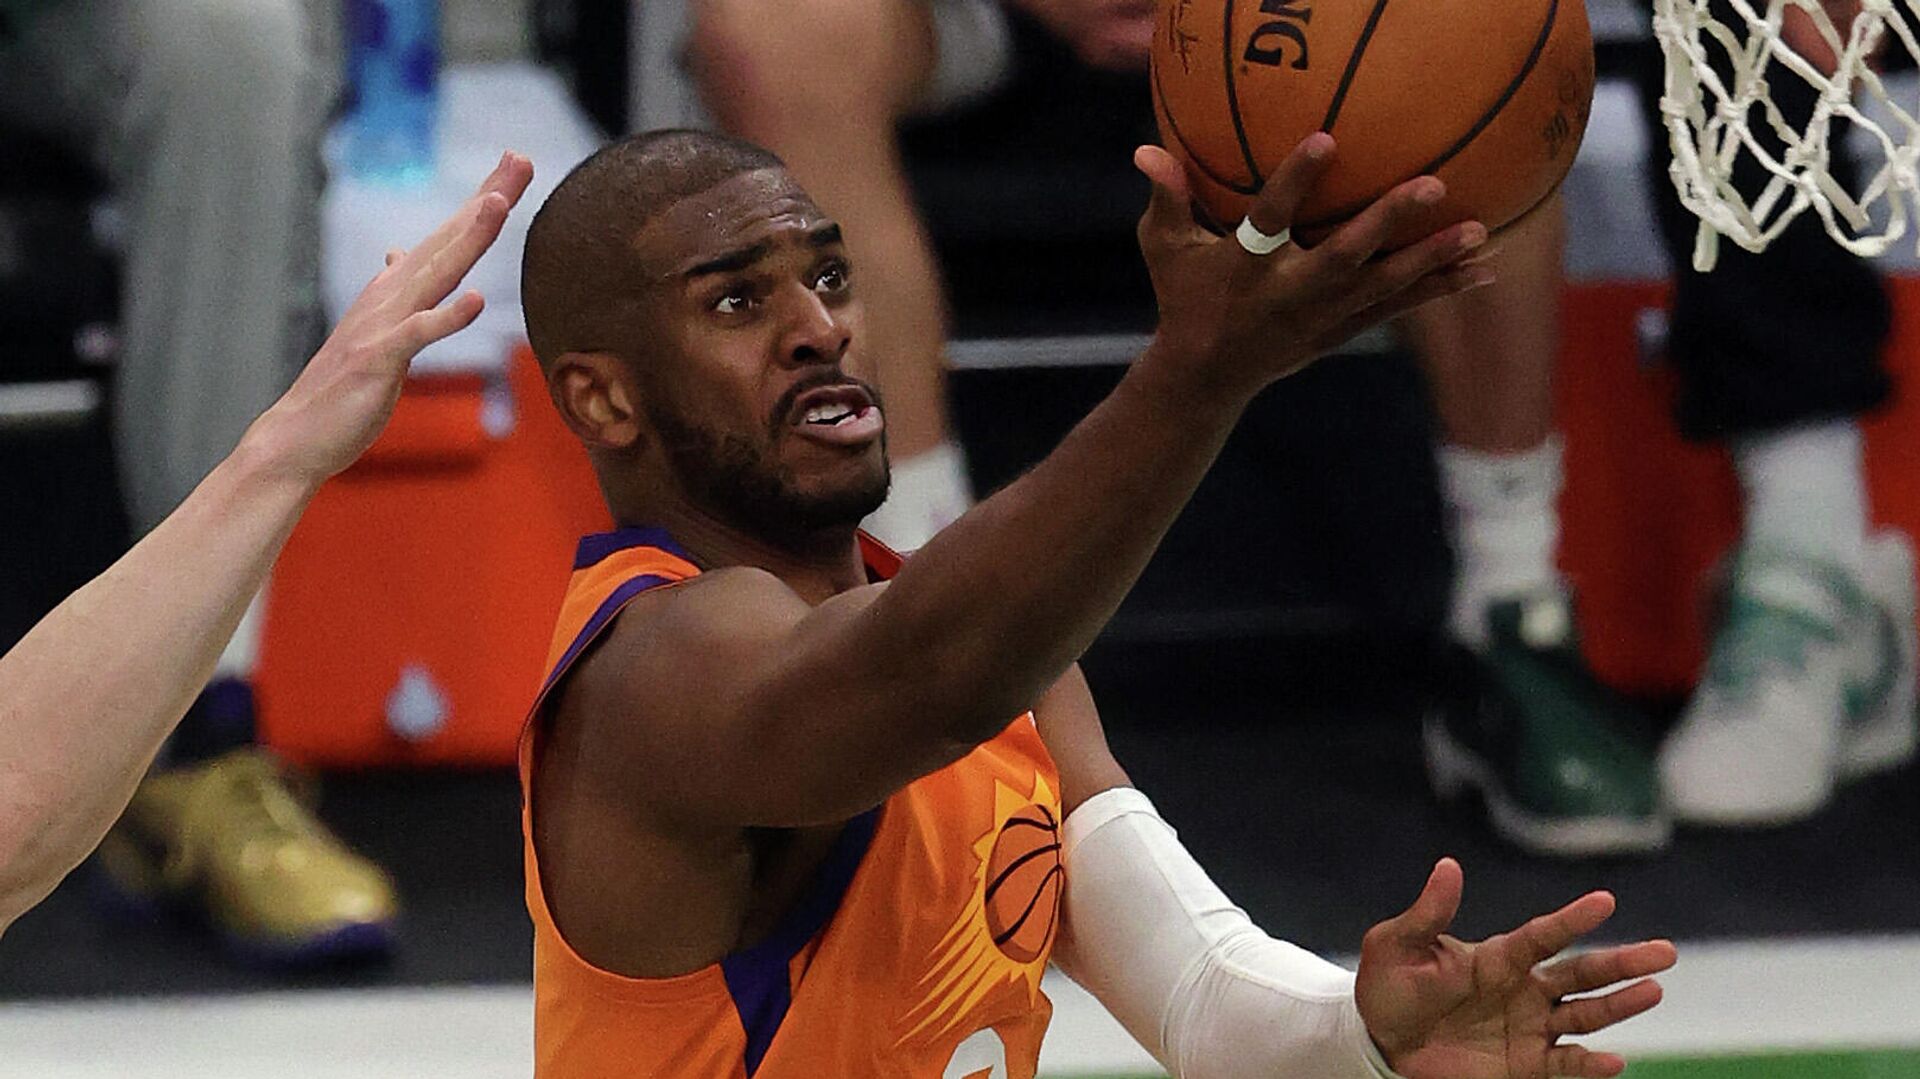 MILWAUKEE, WISCONSIN - JULY 20: Chris Paul #3 of the Phoenix Suns goes up for a shot against the Milwaukee Bucks during the first half in Game Six of the NBA Finals at Fiserv Forum on July 20, 2021 in Milwaukee, Wisconsin. NOTE TO USER: User expressly acknowledges and agrees that, by downloading and or using this photograph, User is consenting to the terms and conditions of the Getty Images License Agreement.   Jonathan Daniel/Getty Images/AFP (Photo by JONATHAN DANIEL / GETTY IMAGES NORTH AMERICA / Getty Images via AFP) - РИА Новости, 1920, 02.08.2021